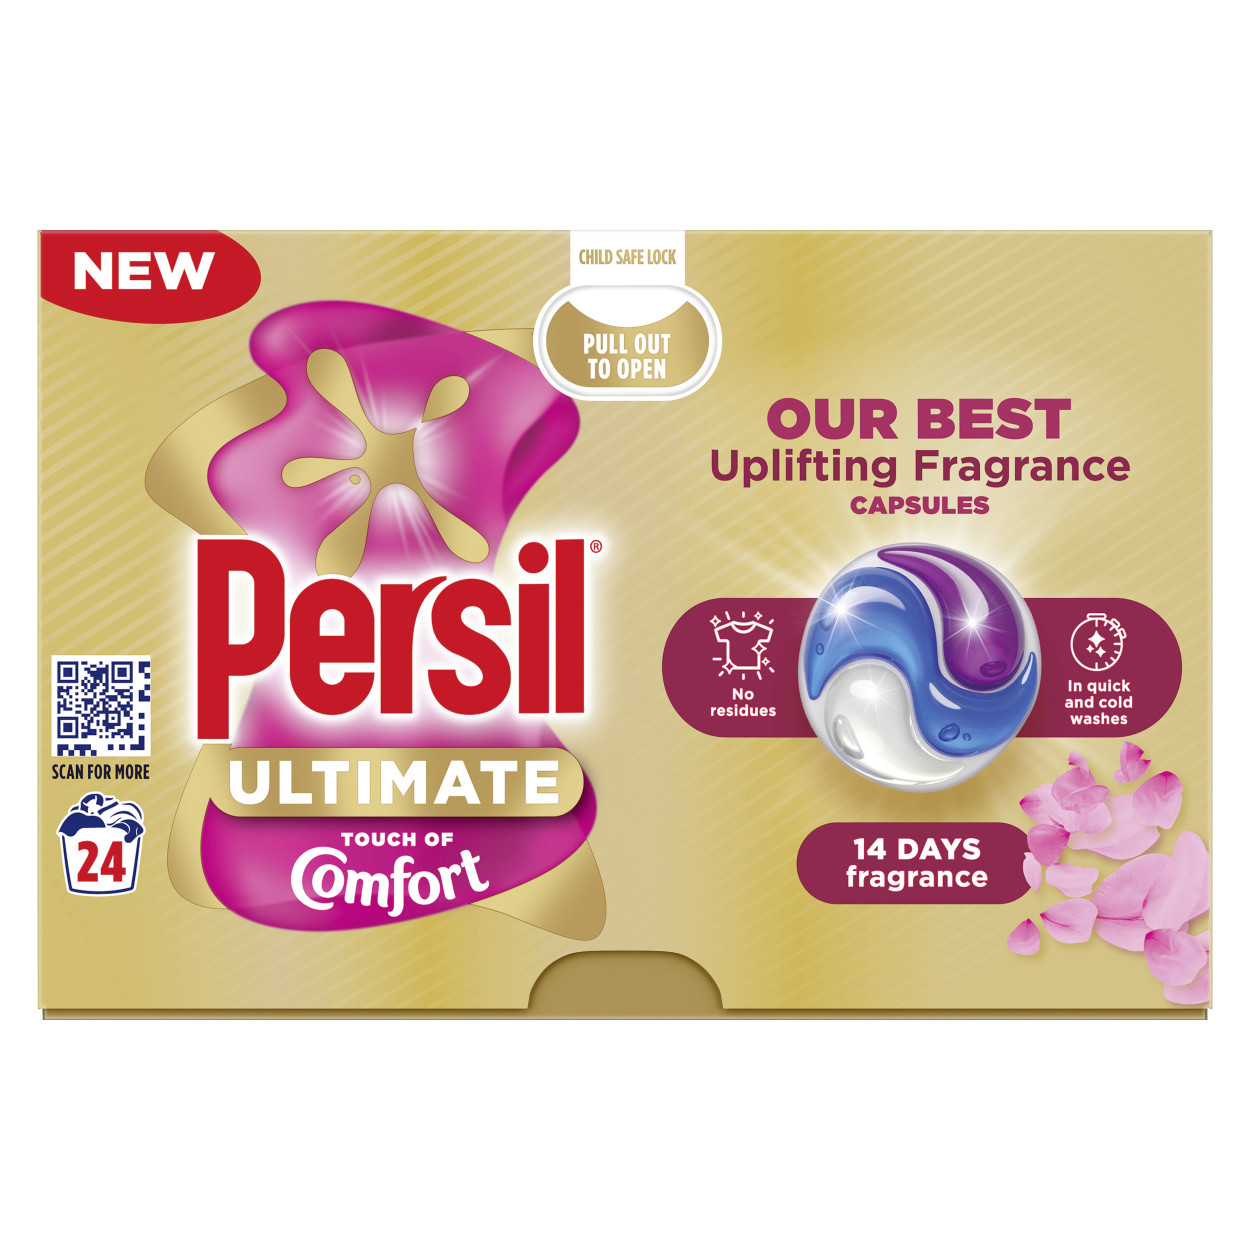 Persil ultimate touch of comfort capsules